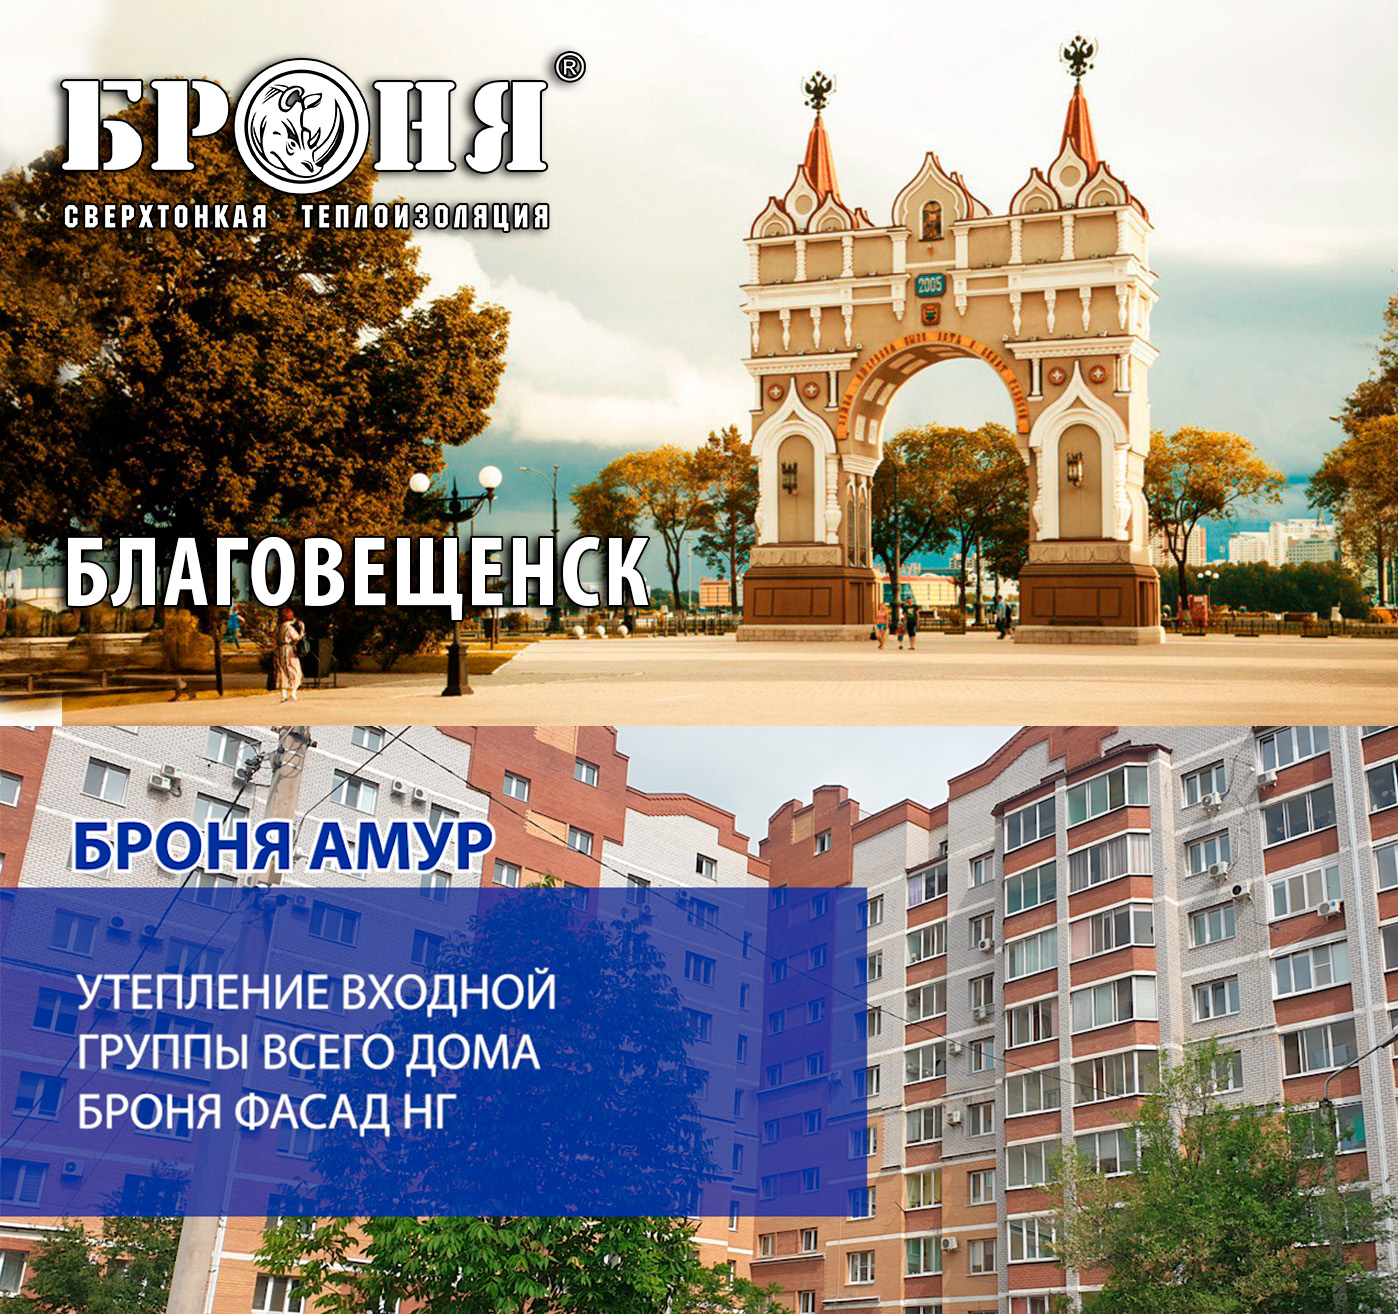 The Bronya Facade of NF is used to insulate 6 entrances of a large multi-storey building in the city of Blagoveshchensk, Bronya region. (photos and videos with dealer comments)